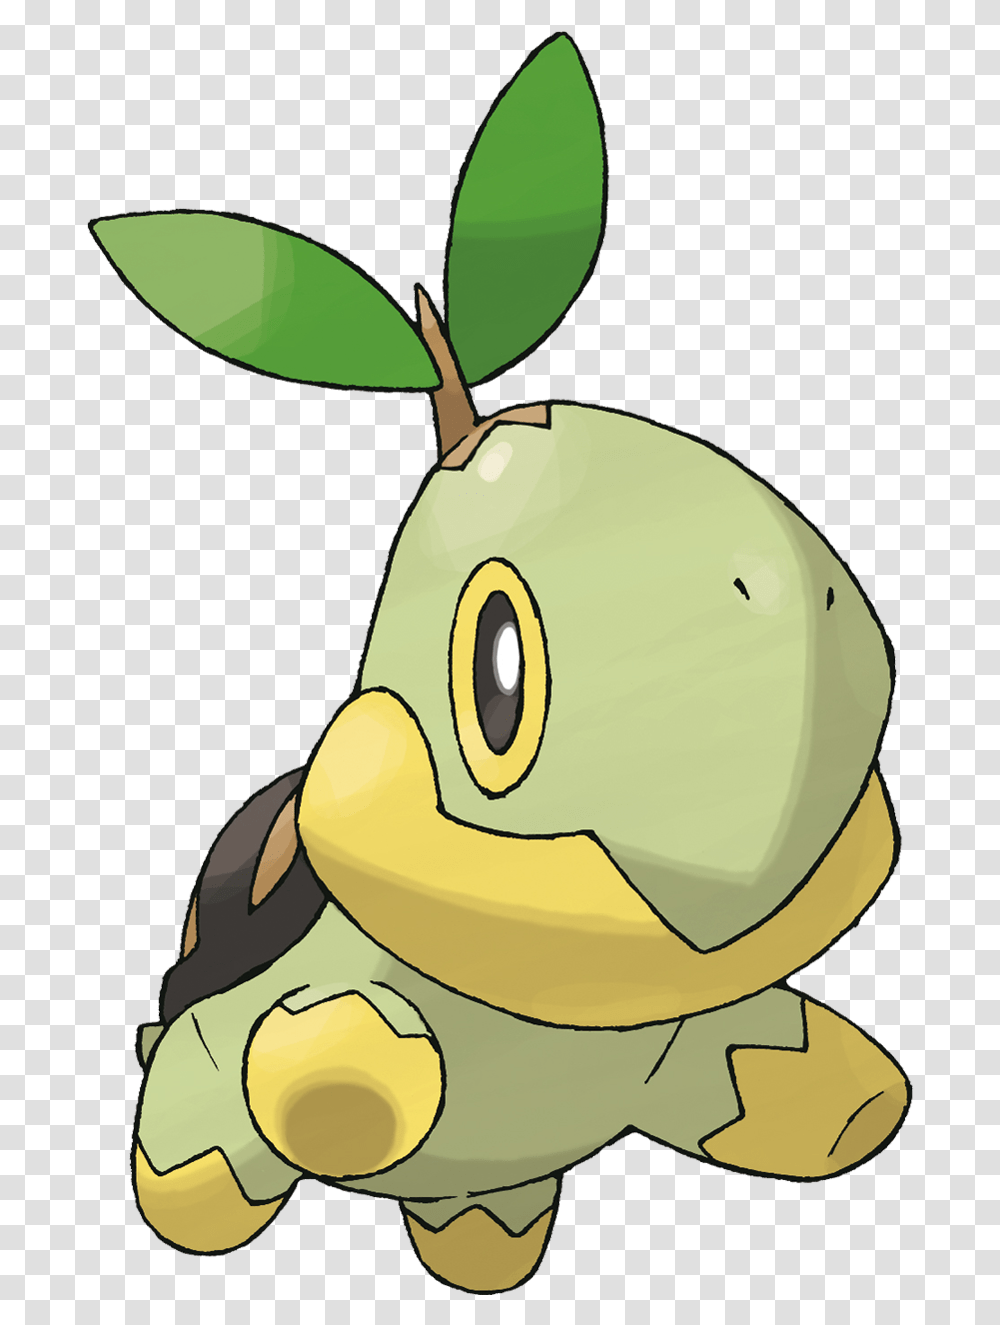 Turtwig & Free Turtwigpng Images 60452 Pngio All Turtle Type Pokemon, Plant, Produce, Food, Vegetable Transparent Png